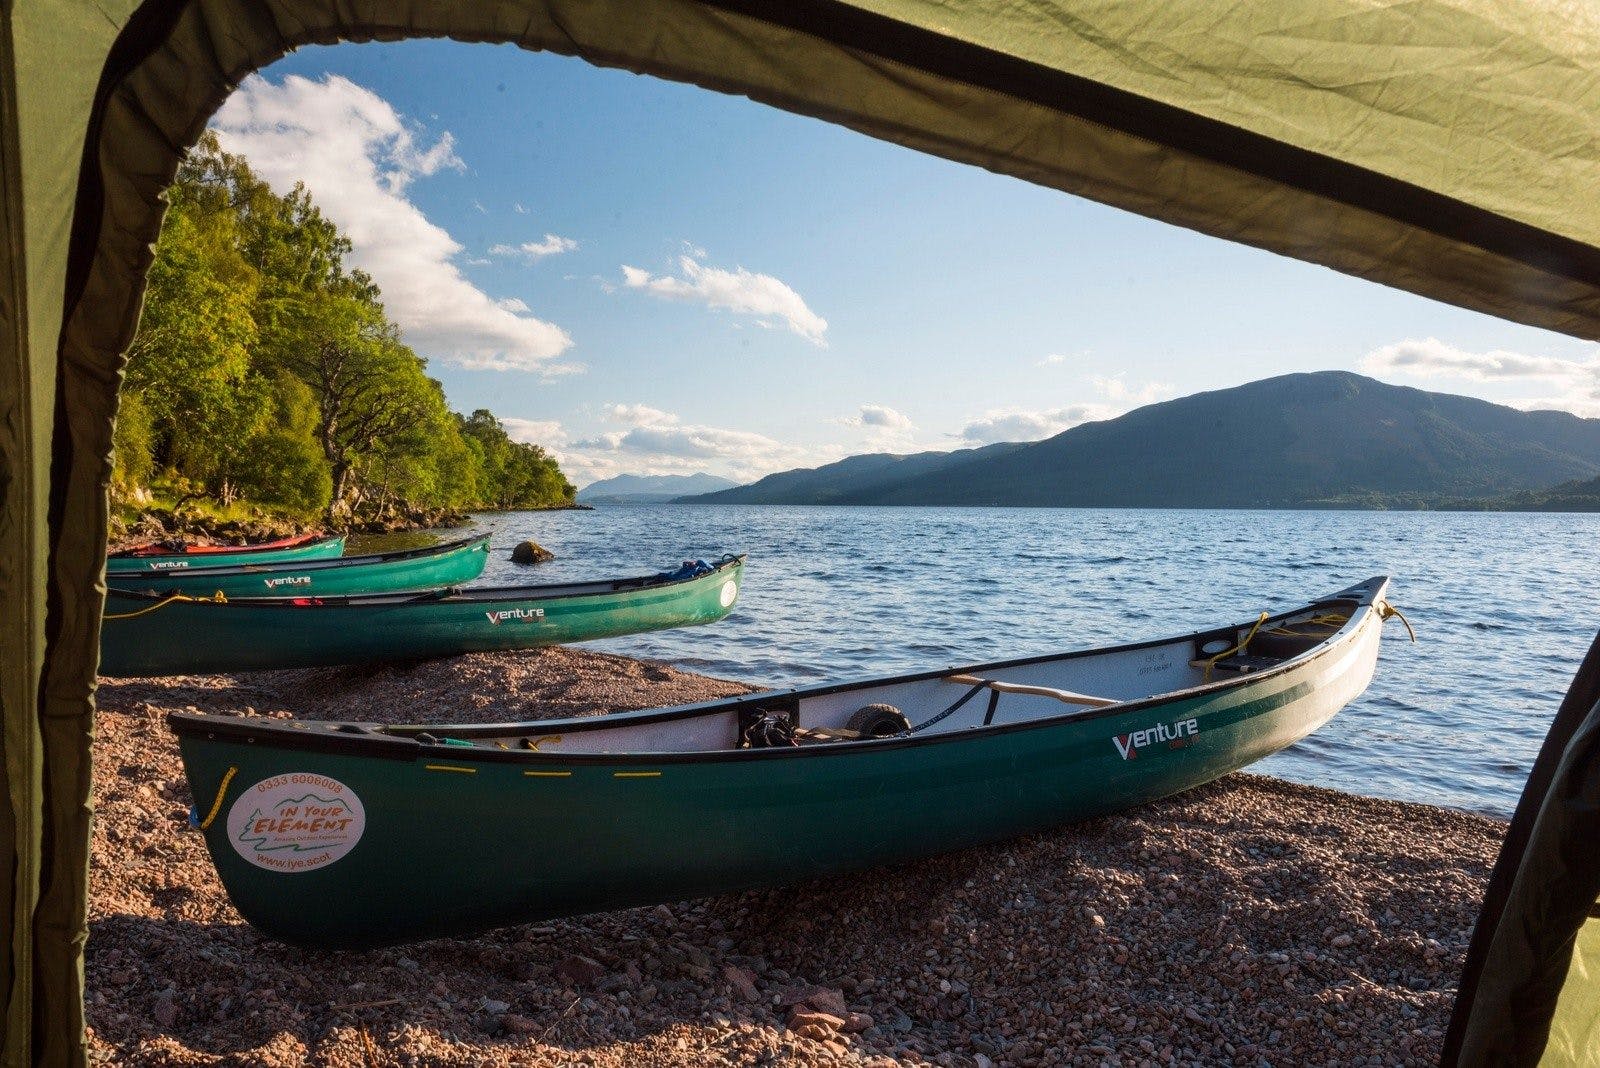 Four canoes on the rocky shore of a Scottish loch, viewed through a tent flap.